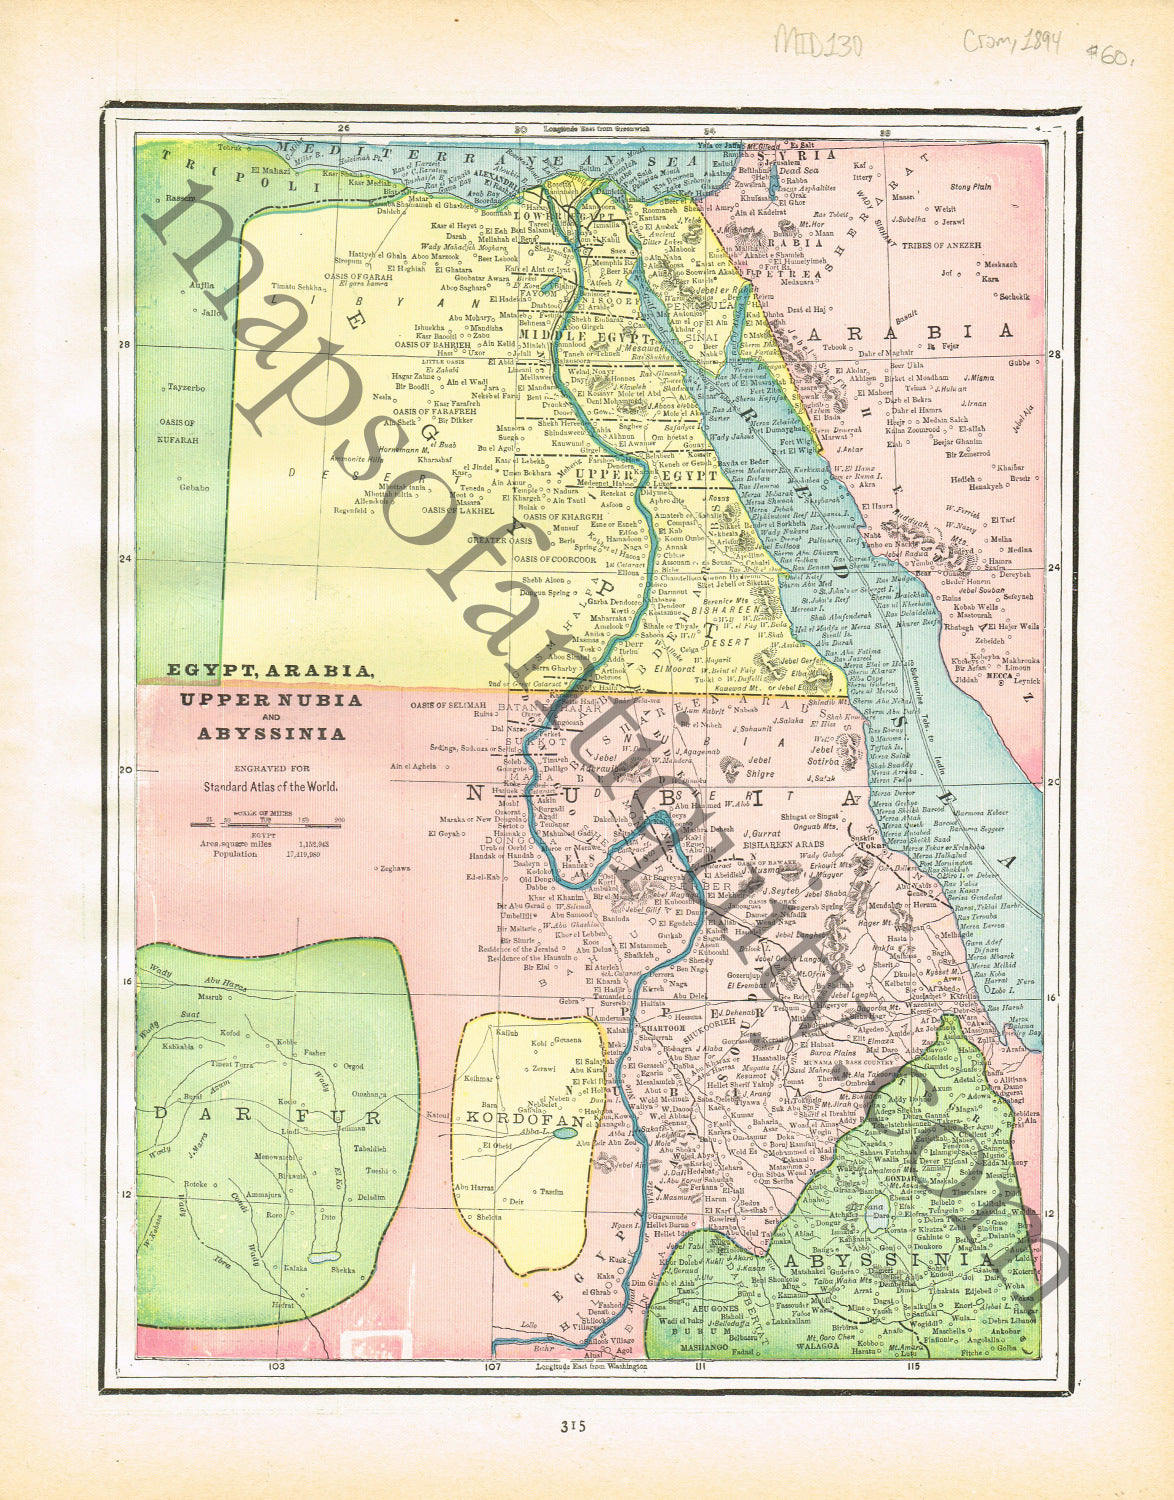 Antique-Printed-Color-Map-Egypt-Arabia-Upper-Nubia-and-Abyssinia-verso:-Alexandria-(Egypt)-and-A-Map-of-Cyprus-Middle-East-&-Holy-Land--1894-Cram-Maps-Of-Antiquity